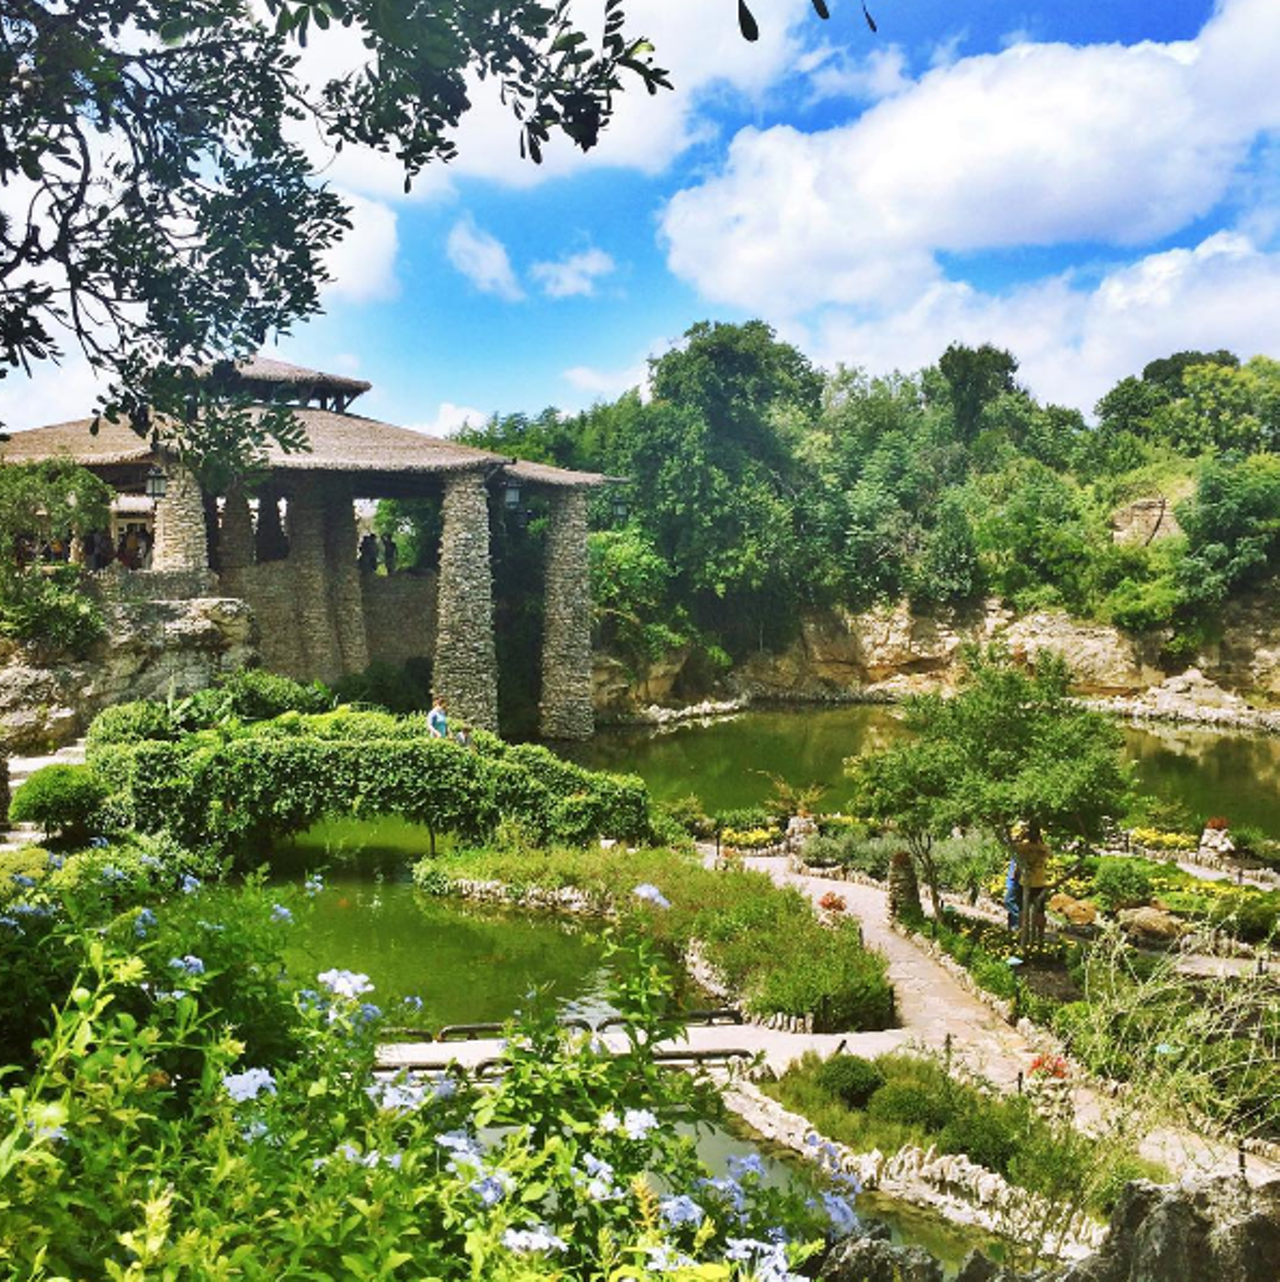 Japanese Tea Gardens
3875 N. St Mary's St., (210) 207-3050, sanantonio.gov
It&#146;s probably been too long since you found a moment of Zen at the Tea Gardens, so do yourself a favor and get down there soon.
Photo via Instagram, thelittlesteccles